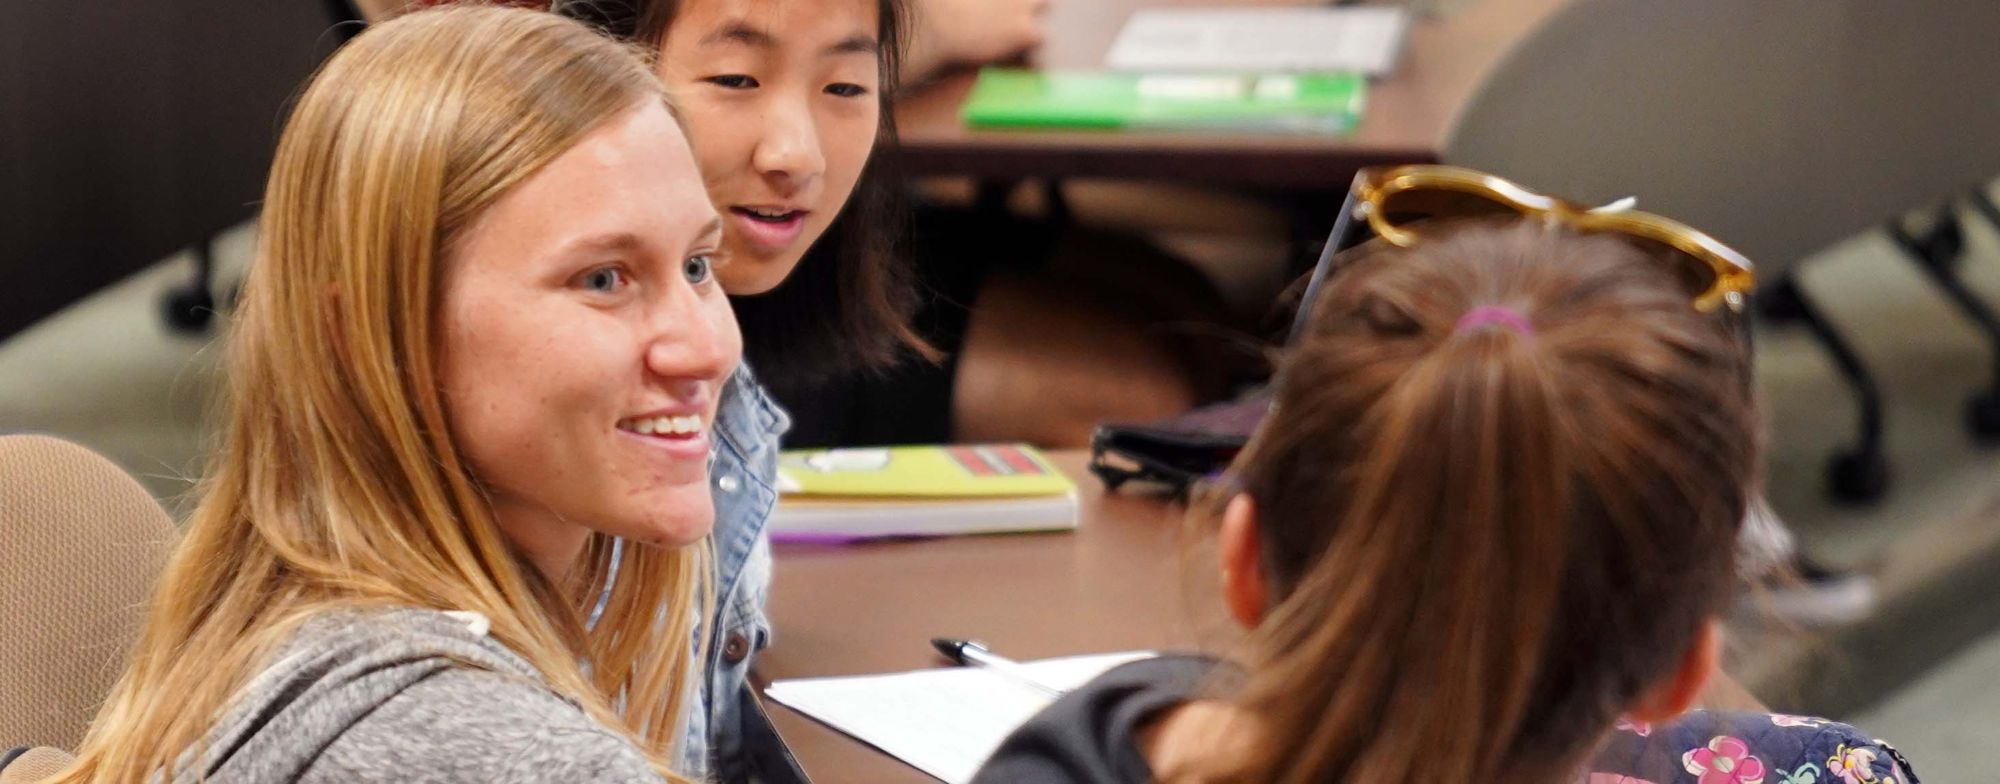 Woman smiles while talking to classmate